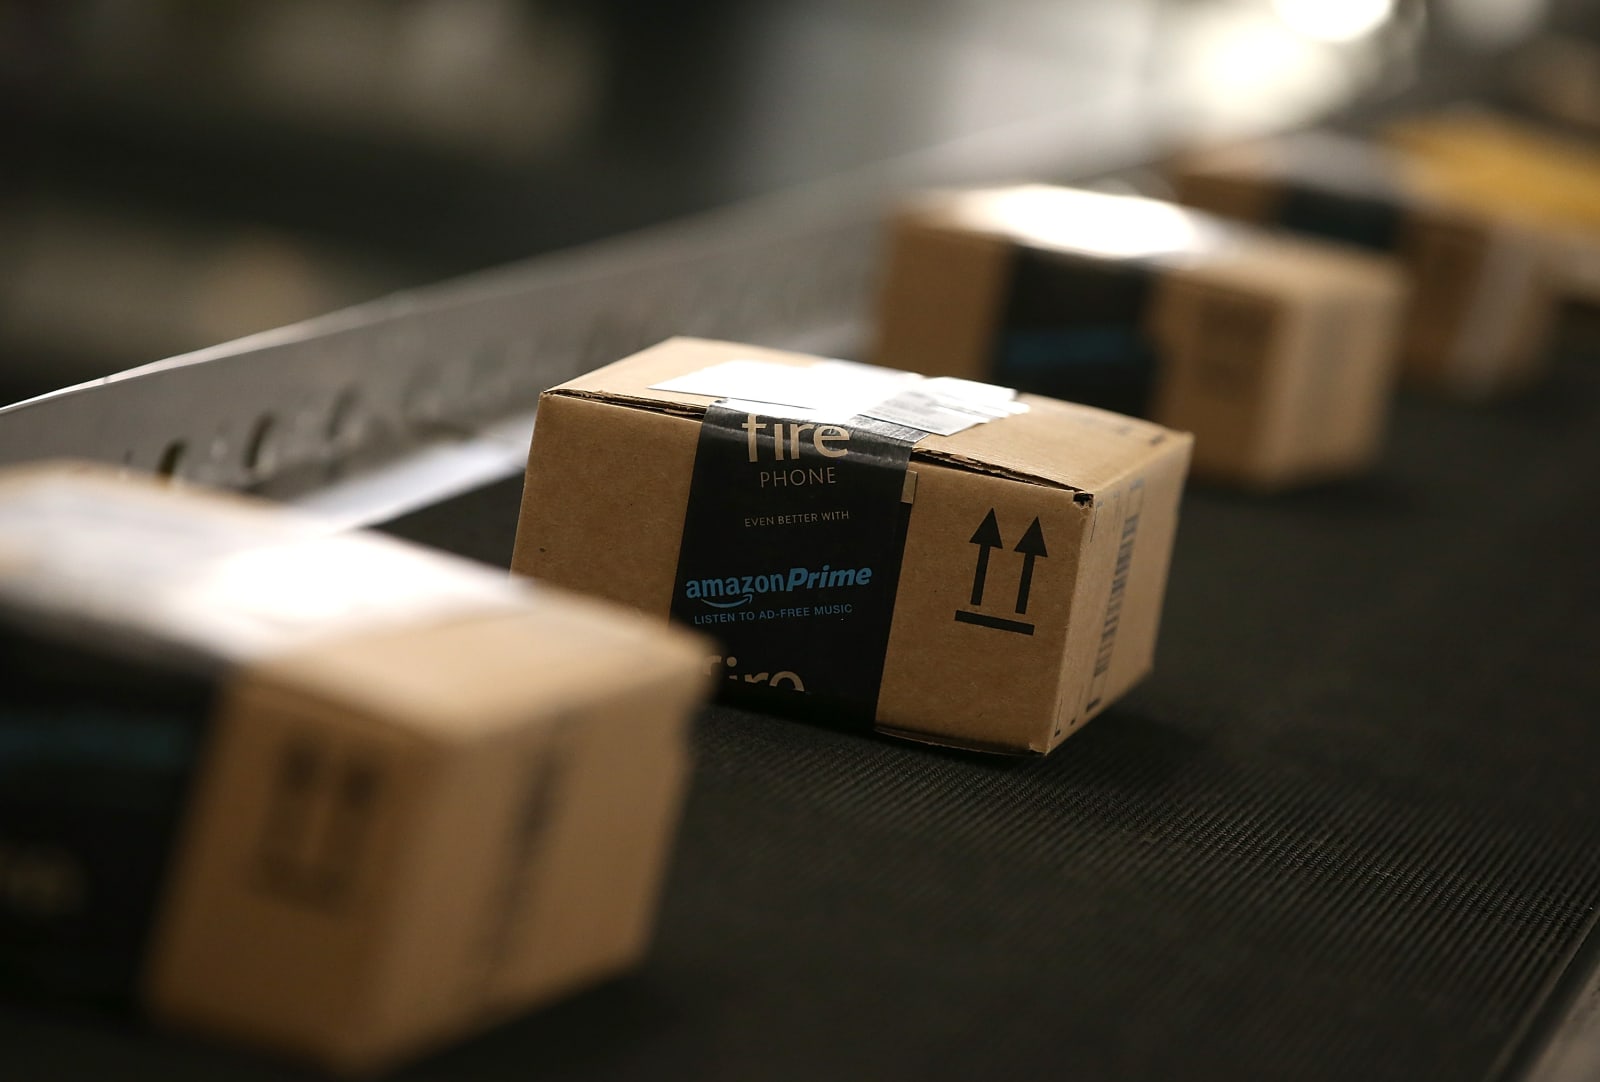 Amazon's Prime Day sale is causing headaches for customers (updated)